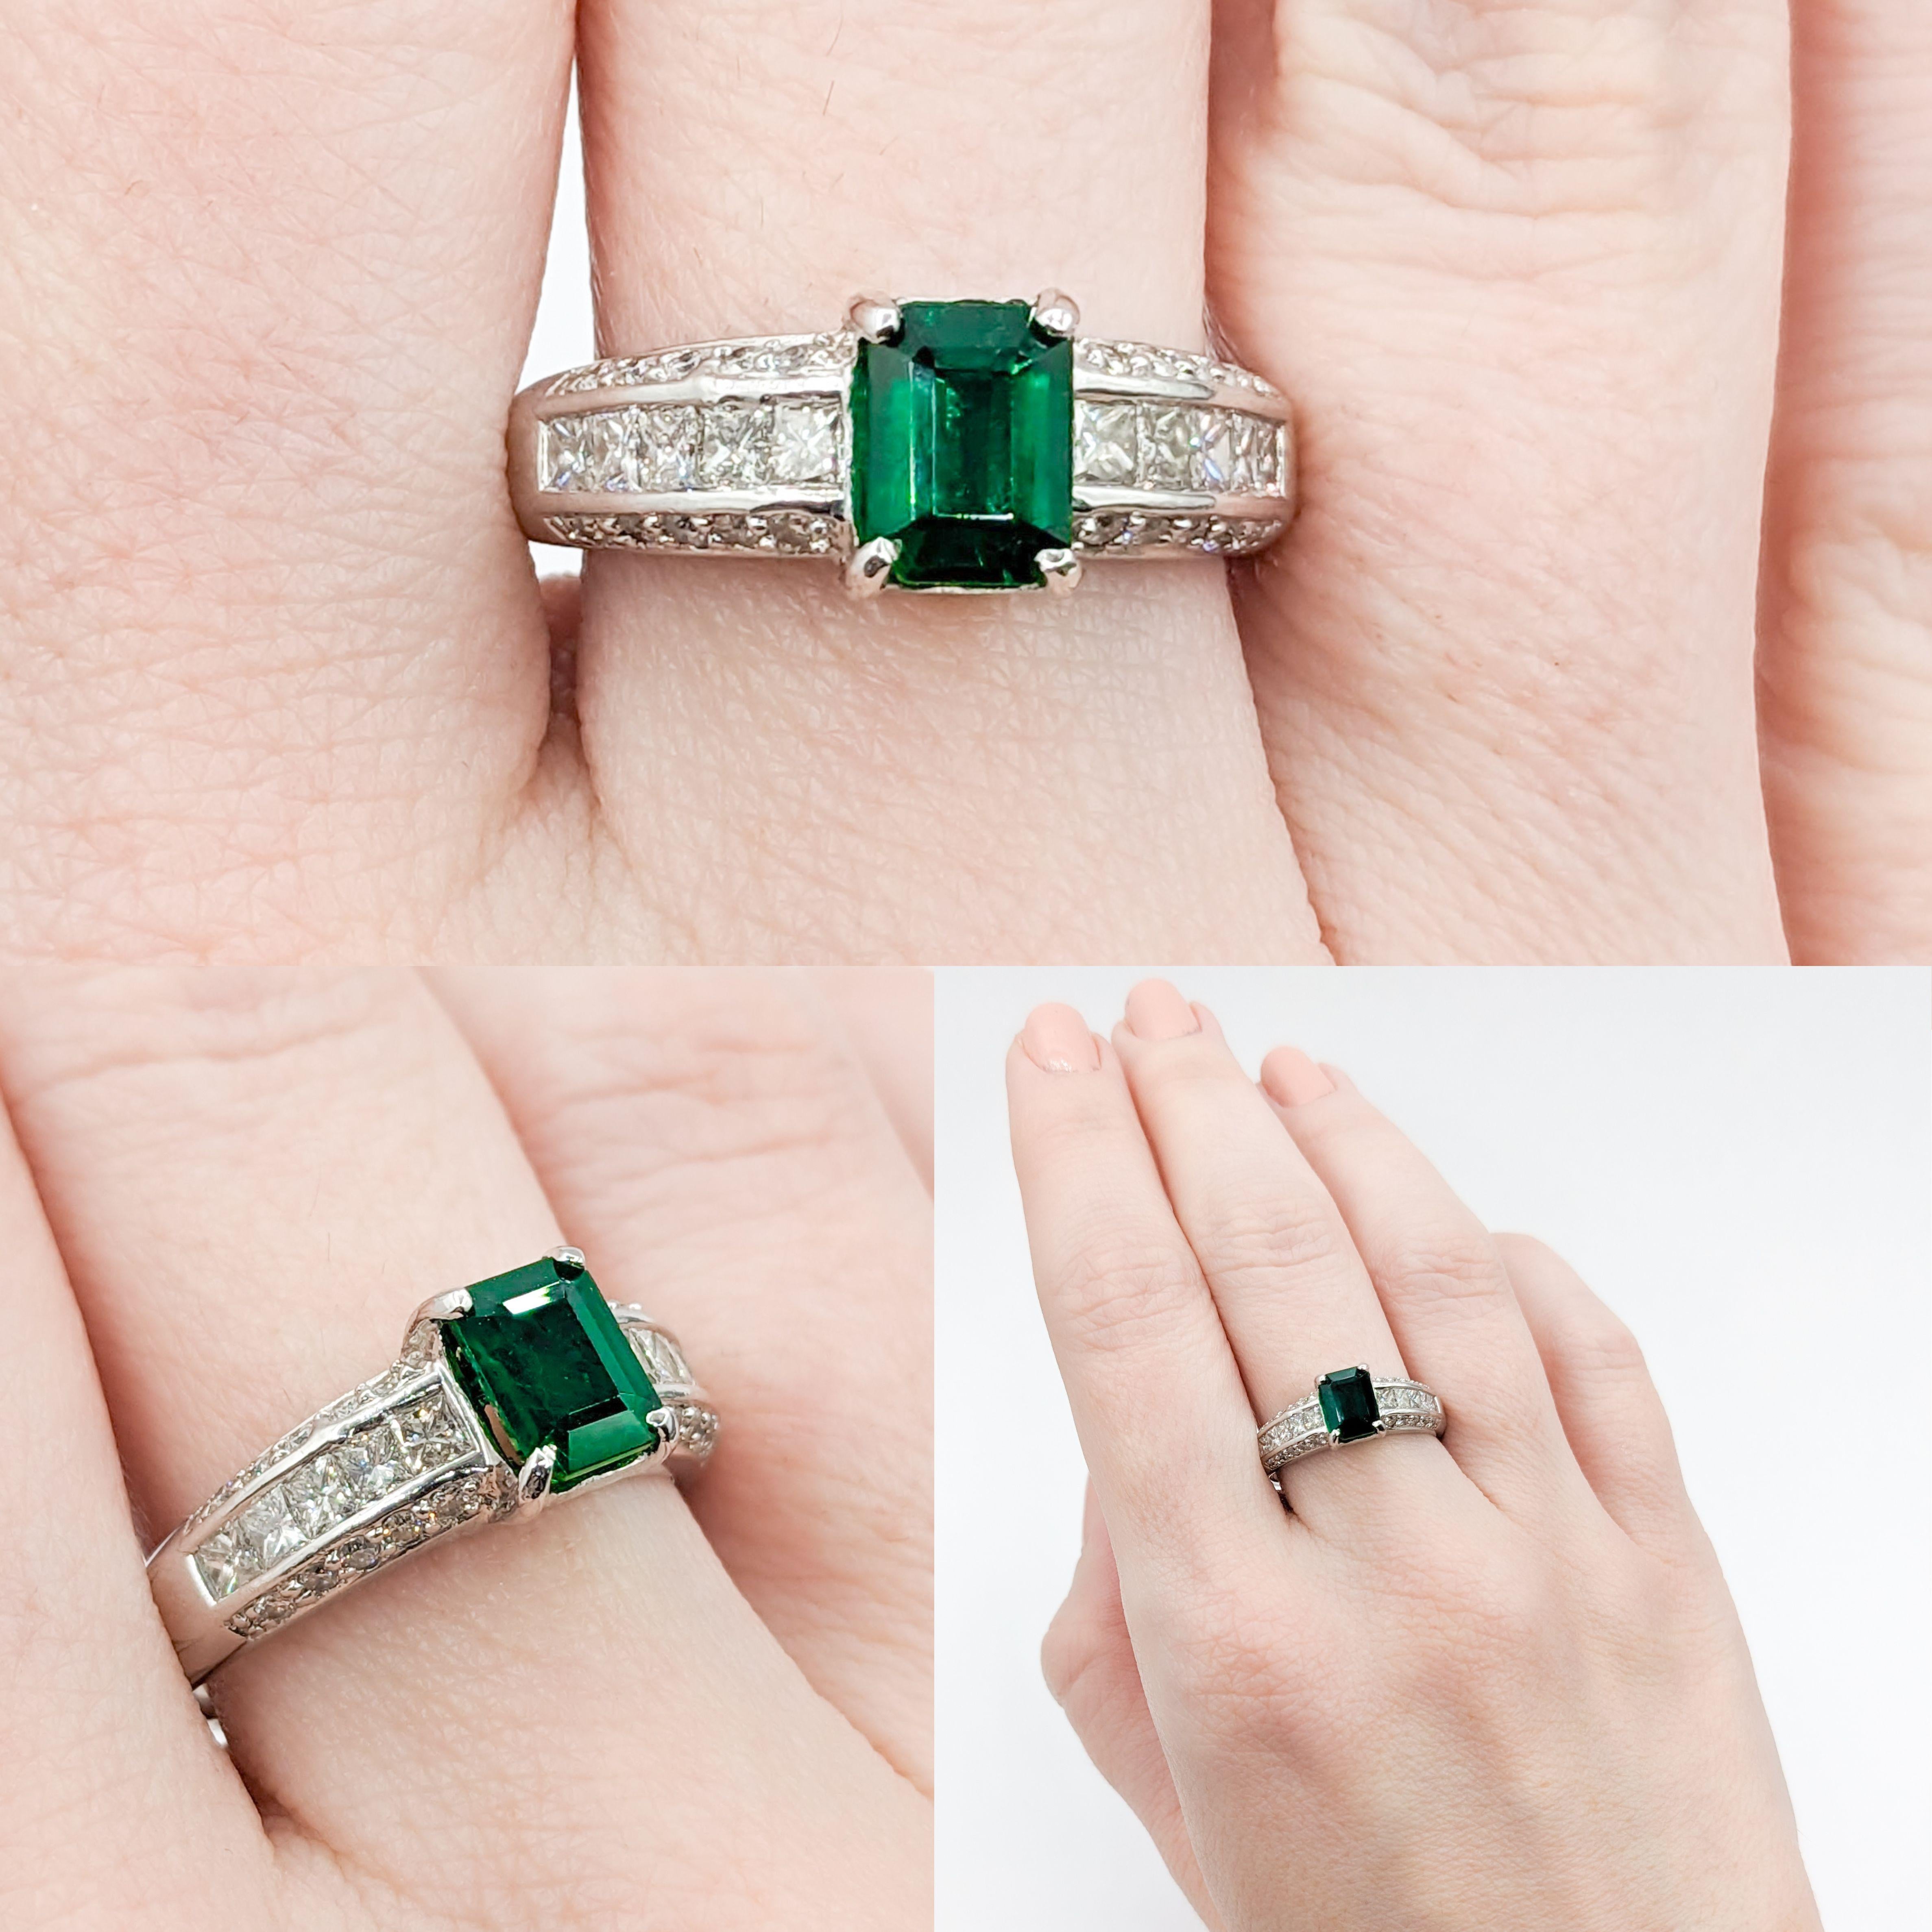 Exquisite 1.13ct Natural Zambian Emerald & Diamond Ring

This exquisite ring is made of 14k white gold and adorned with .75ctw diamonds, which are of H color and SI1 clarity, adding a sparkling touch to the ring. Additionally, the ring boasts a